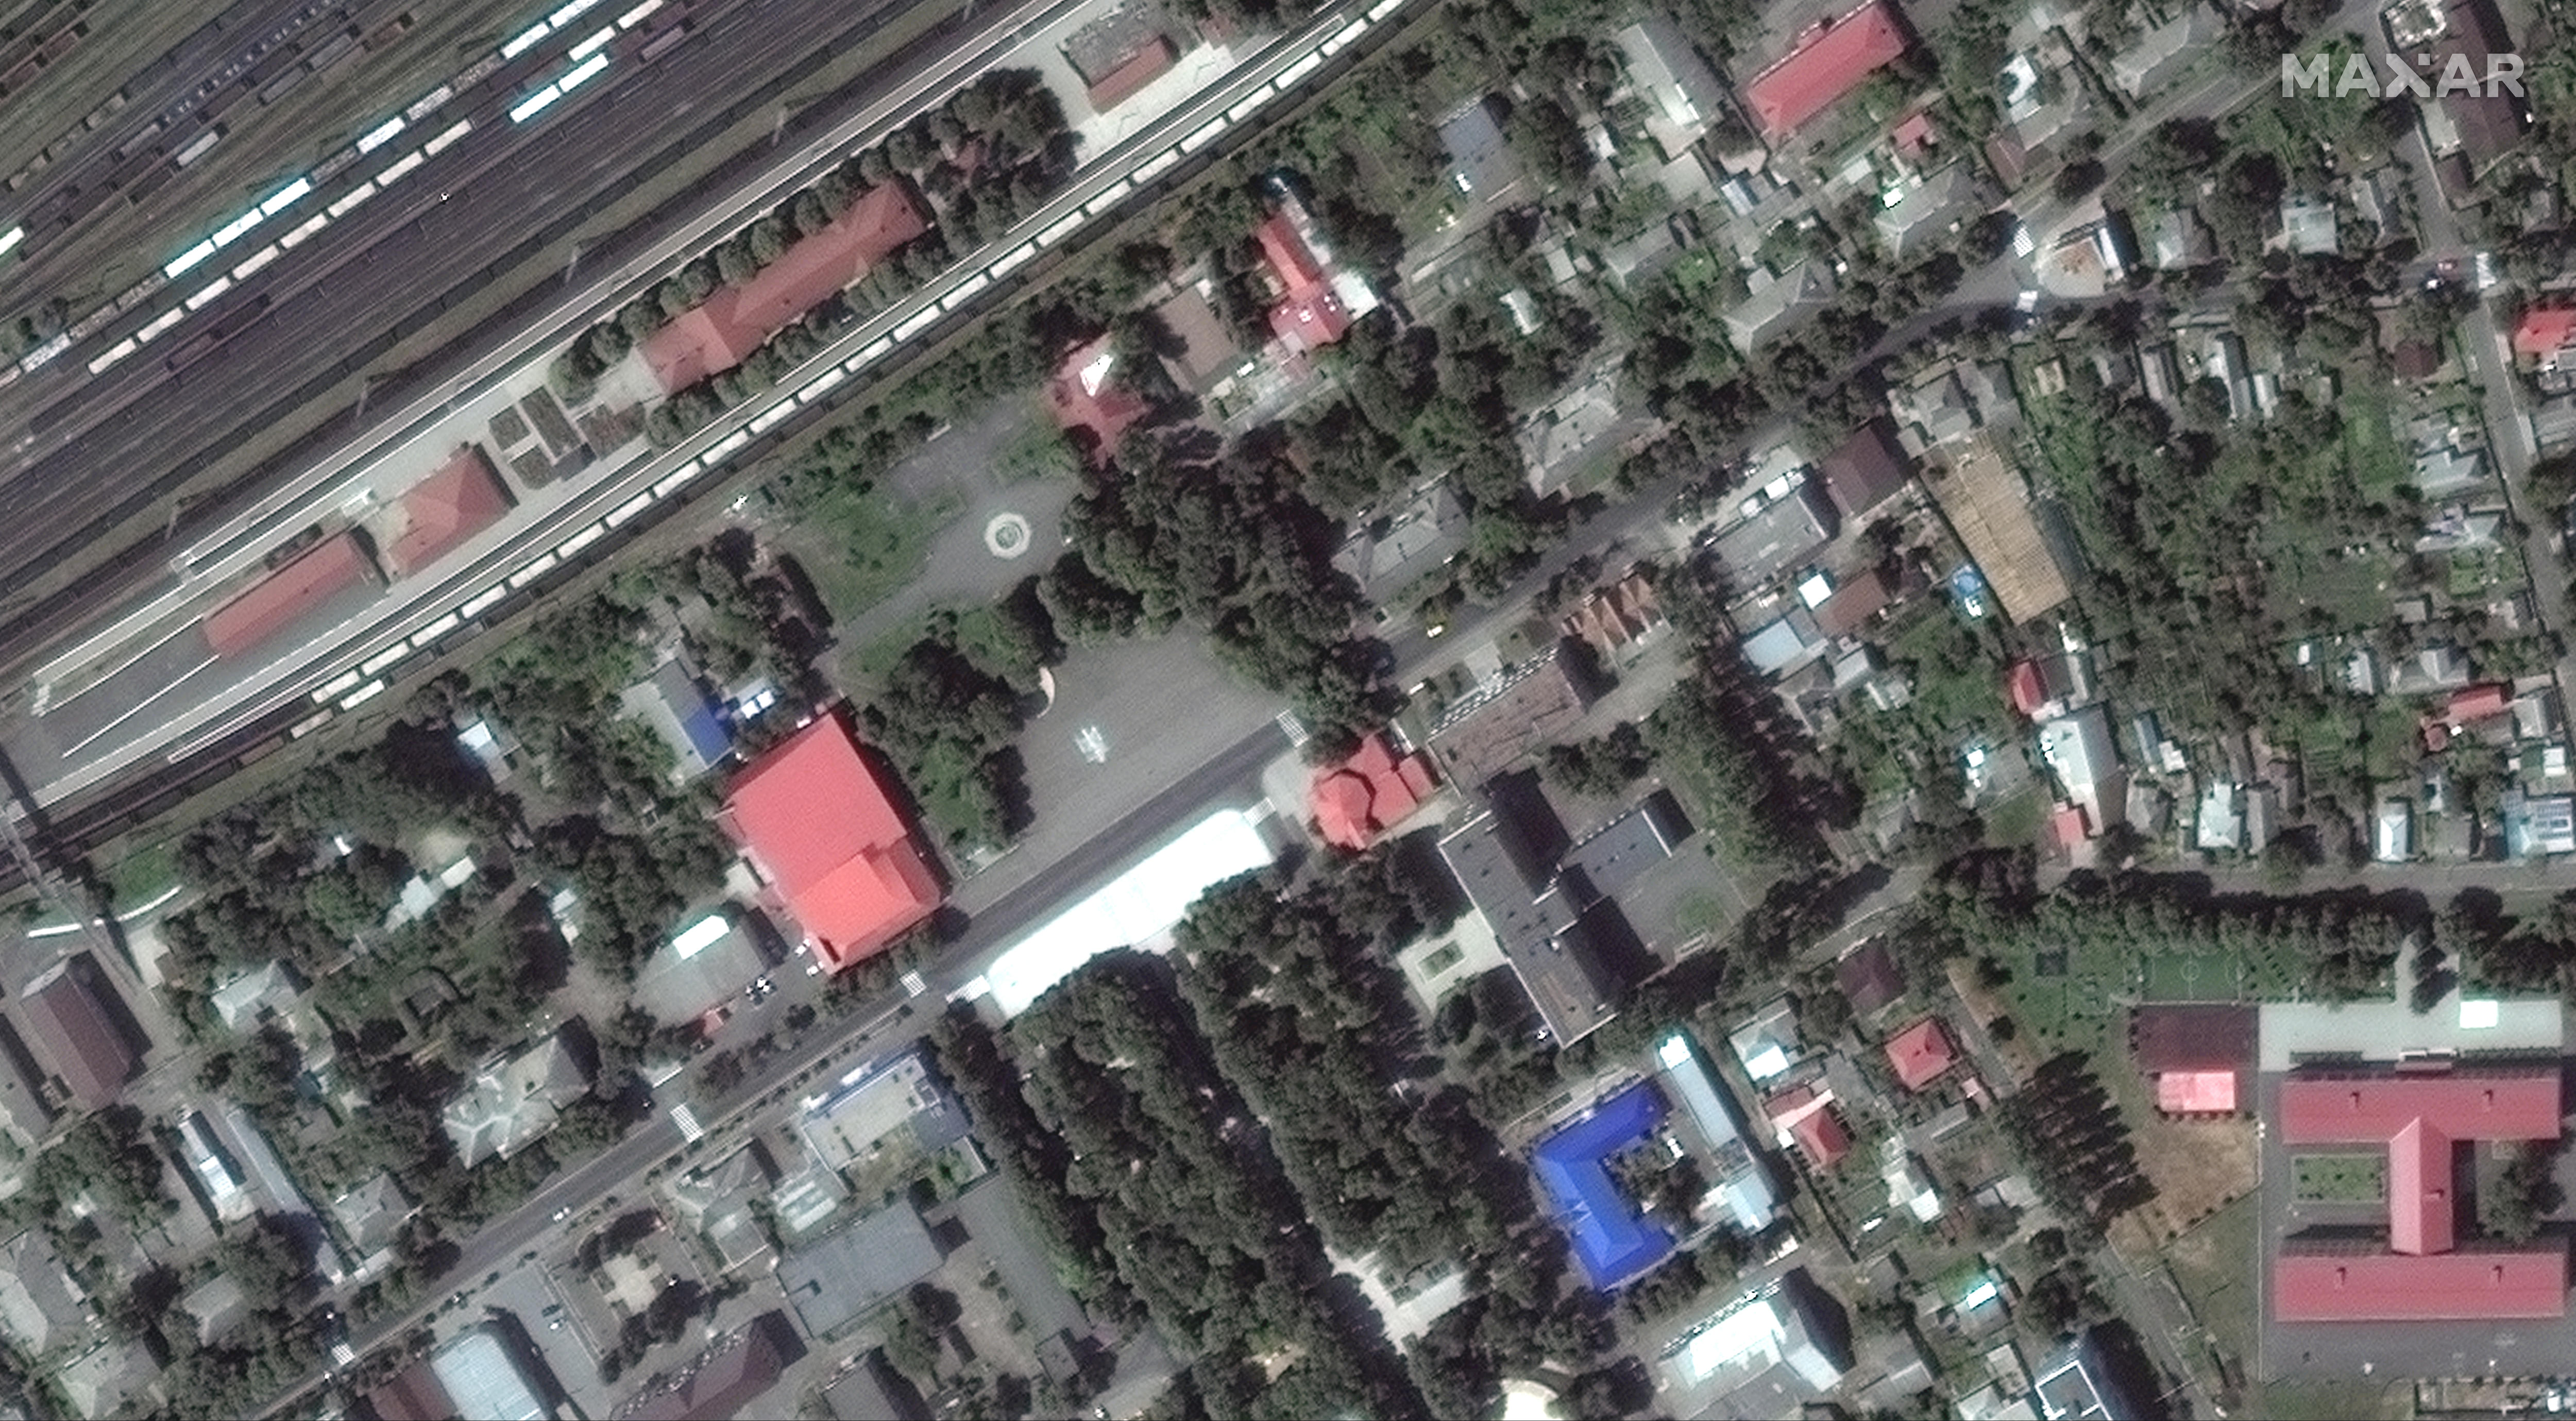 Satellite image of a train station and surrounding buildings in a city centre.